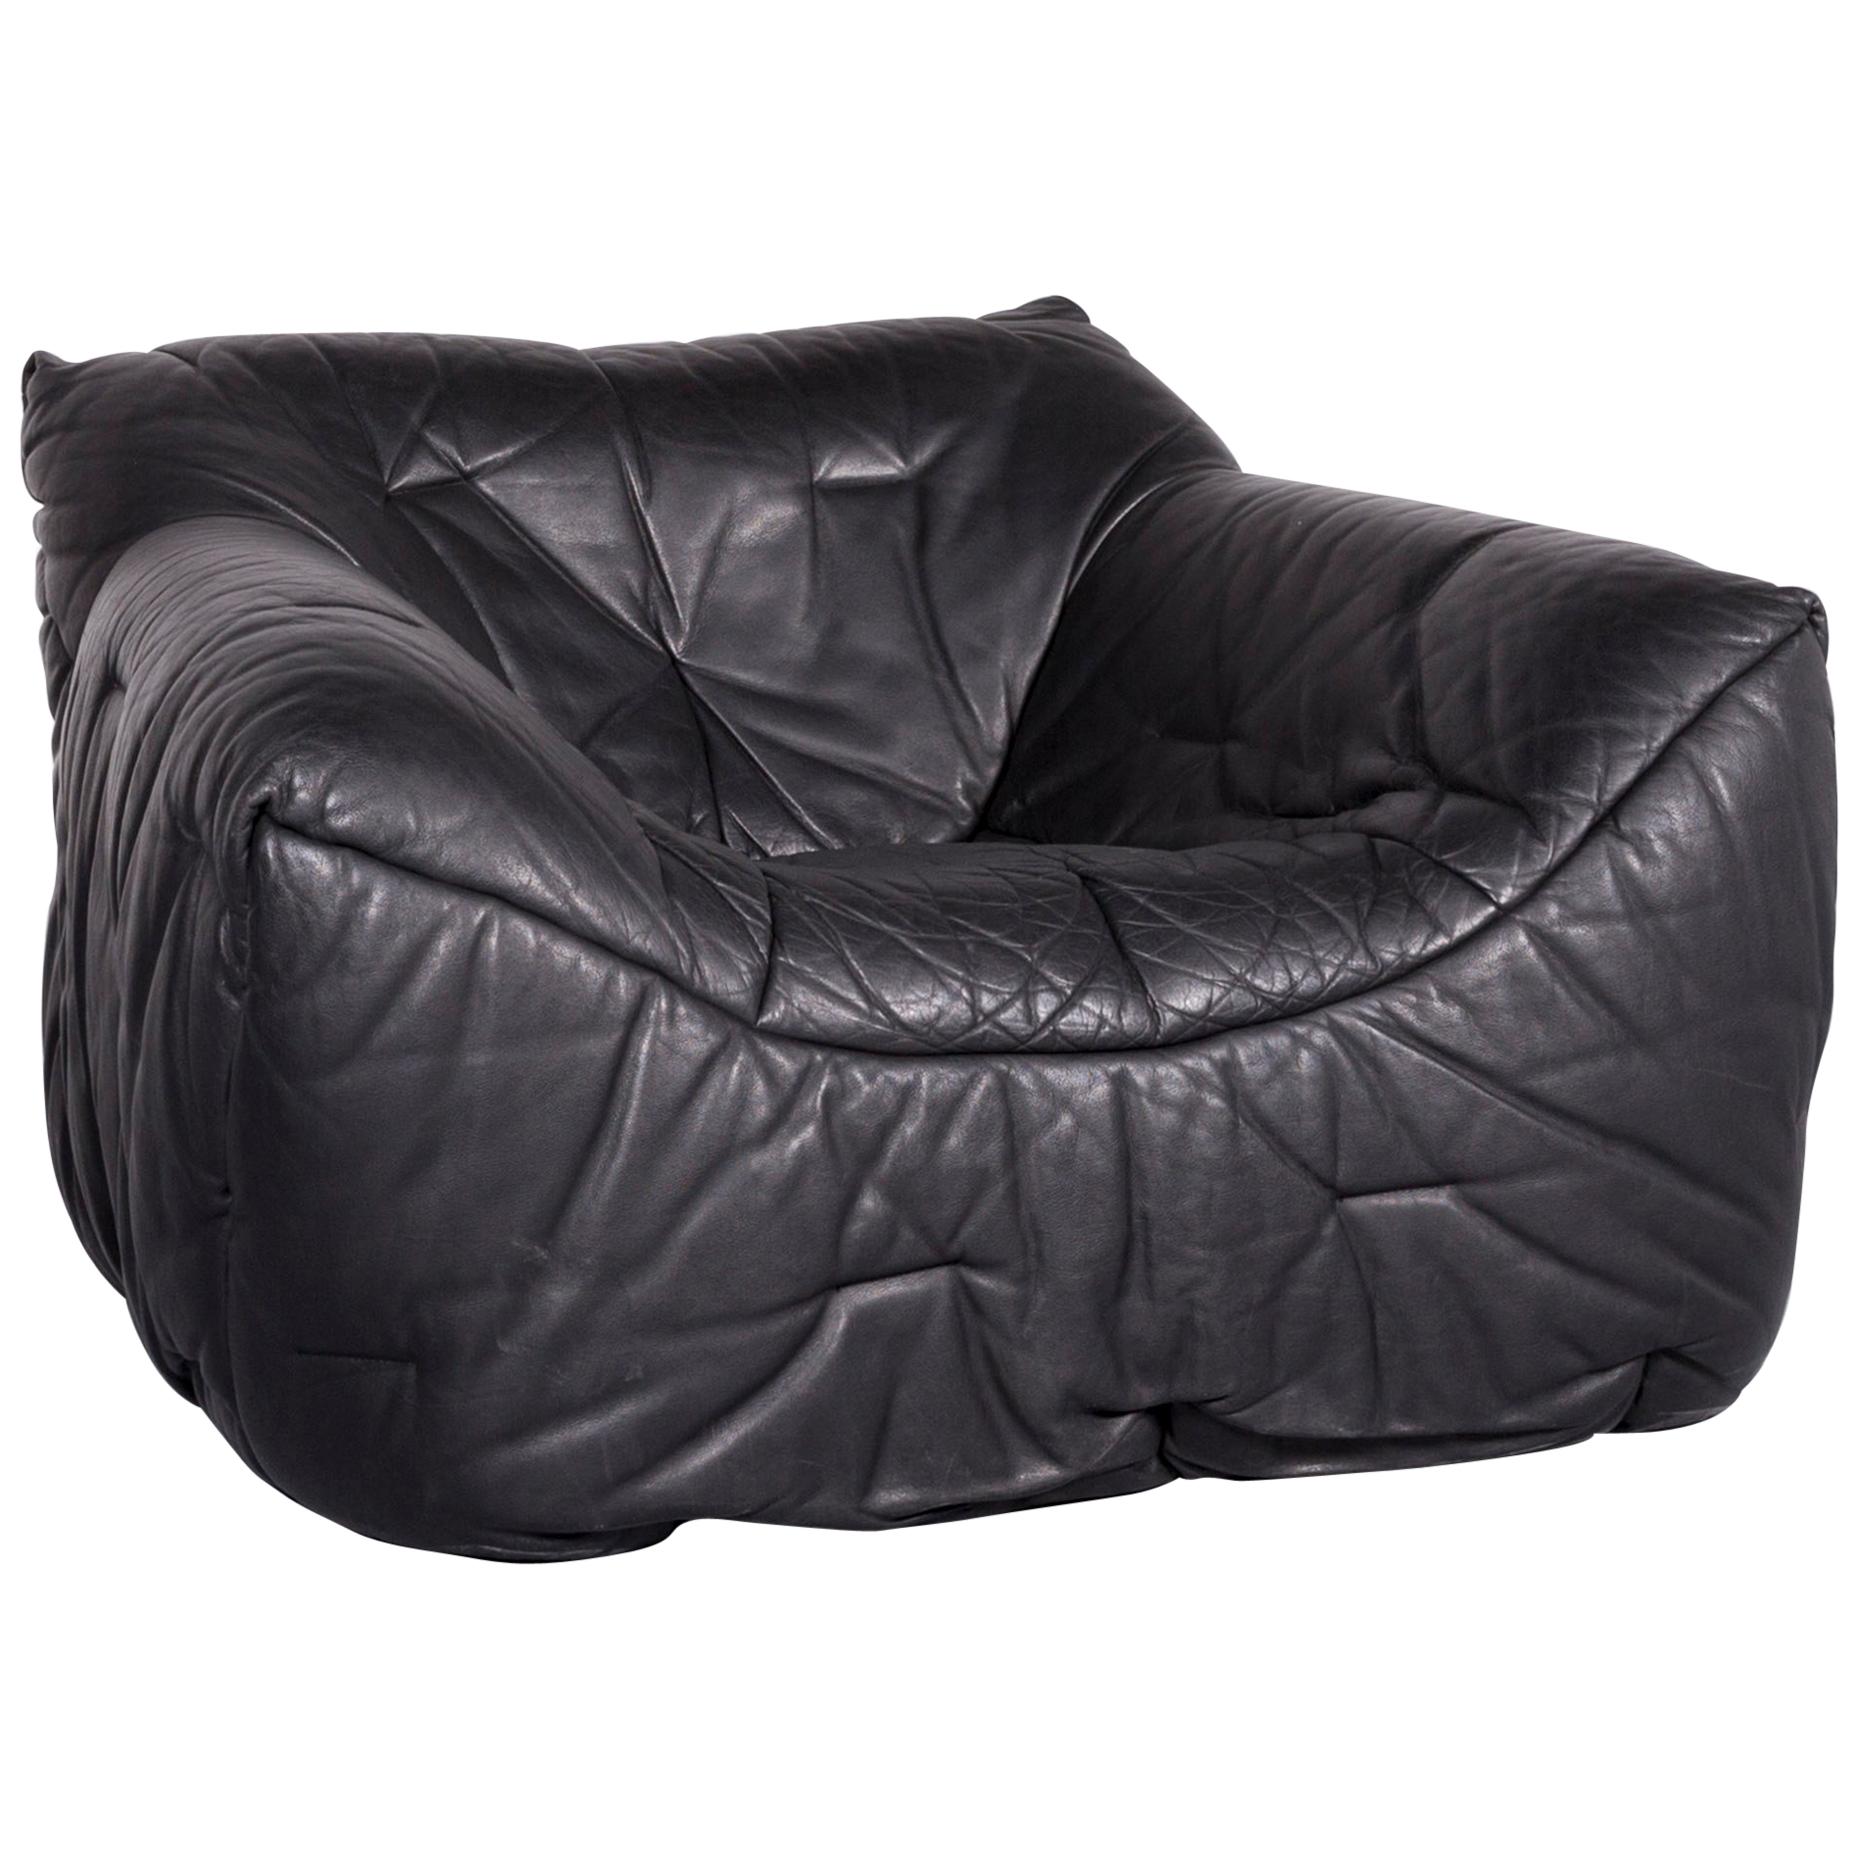 Roche Bobois Informel Designer Leather Armchair Black One-Seat Couch For Sale